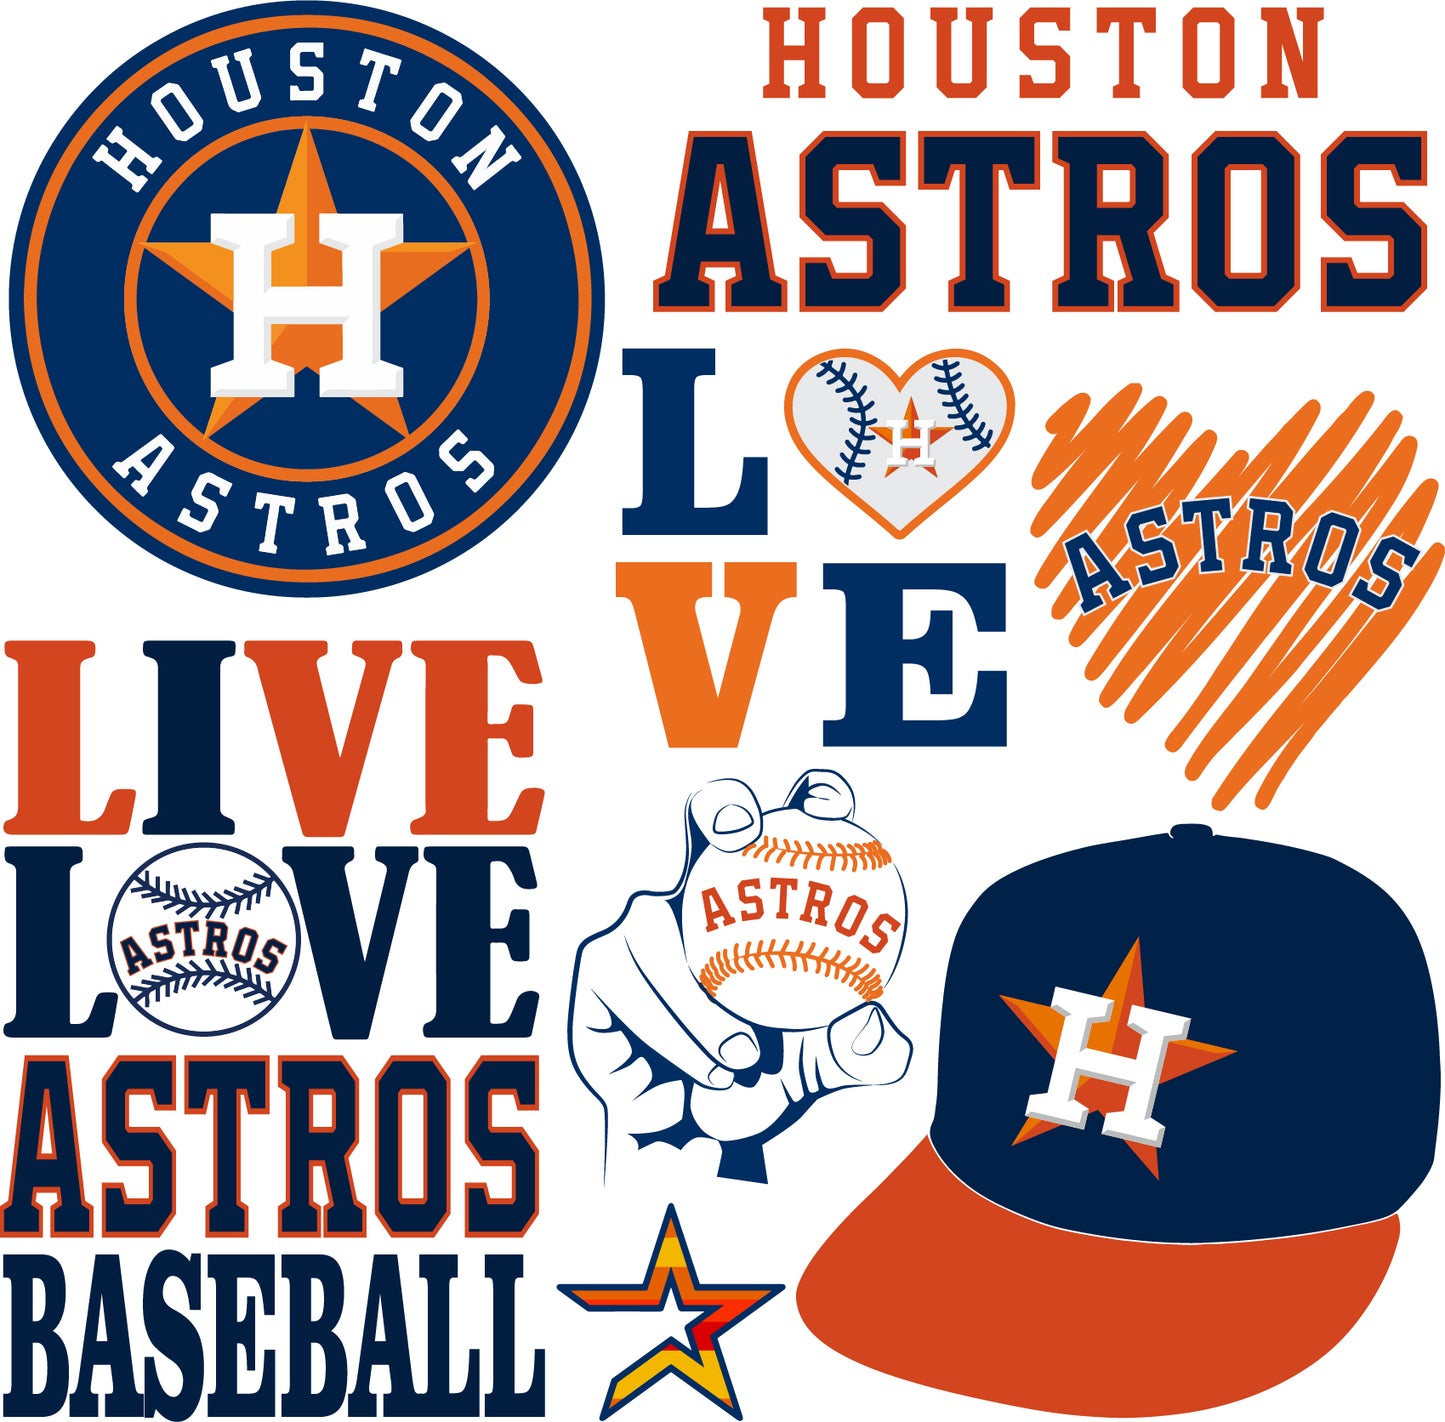 Houston Astros Basenall Half Sheet Misc. (Must Purchase 2 Half sheets - You Can Mix & Match)